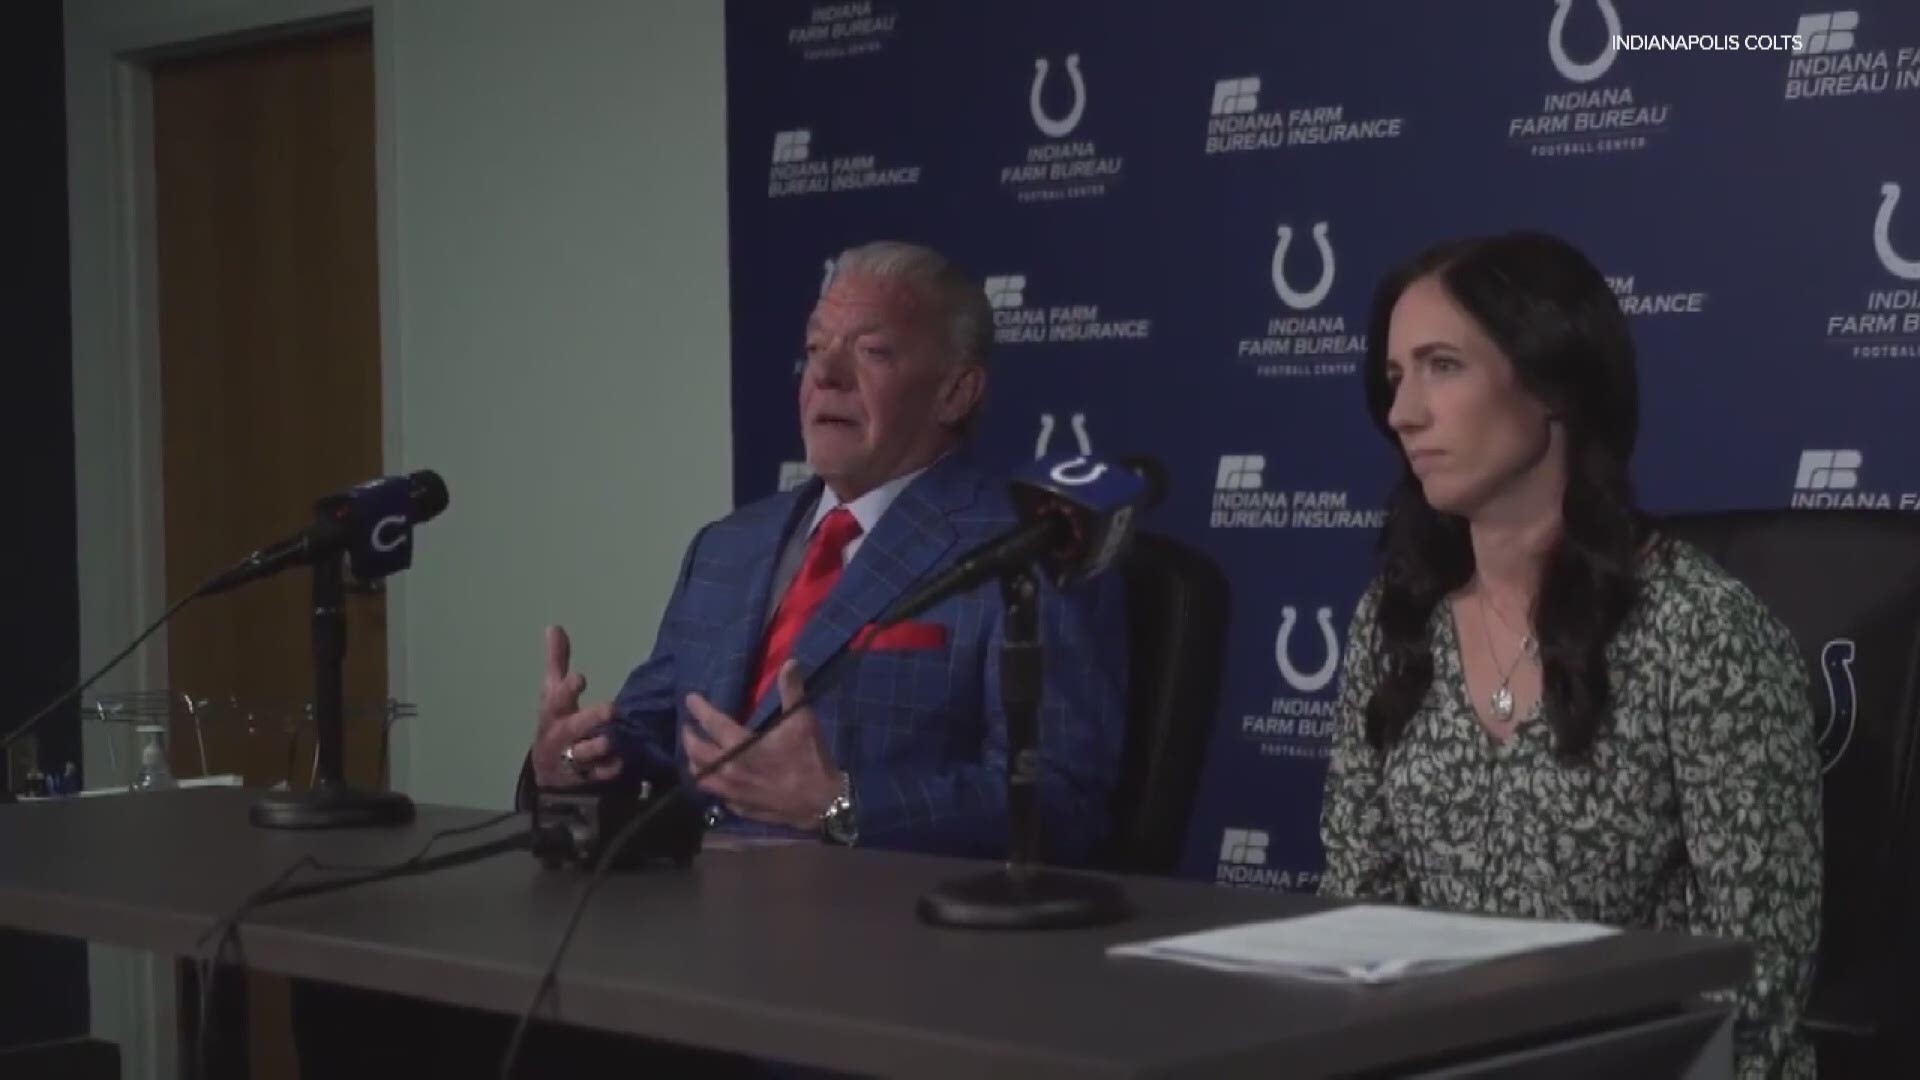 The Irsay family, which owns the Indianapolis Colts, is opening up about their own struggles in hopes of encouraging others to seek help.